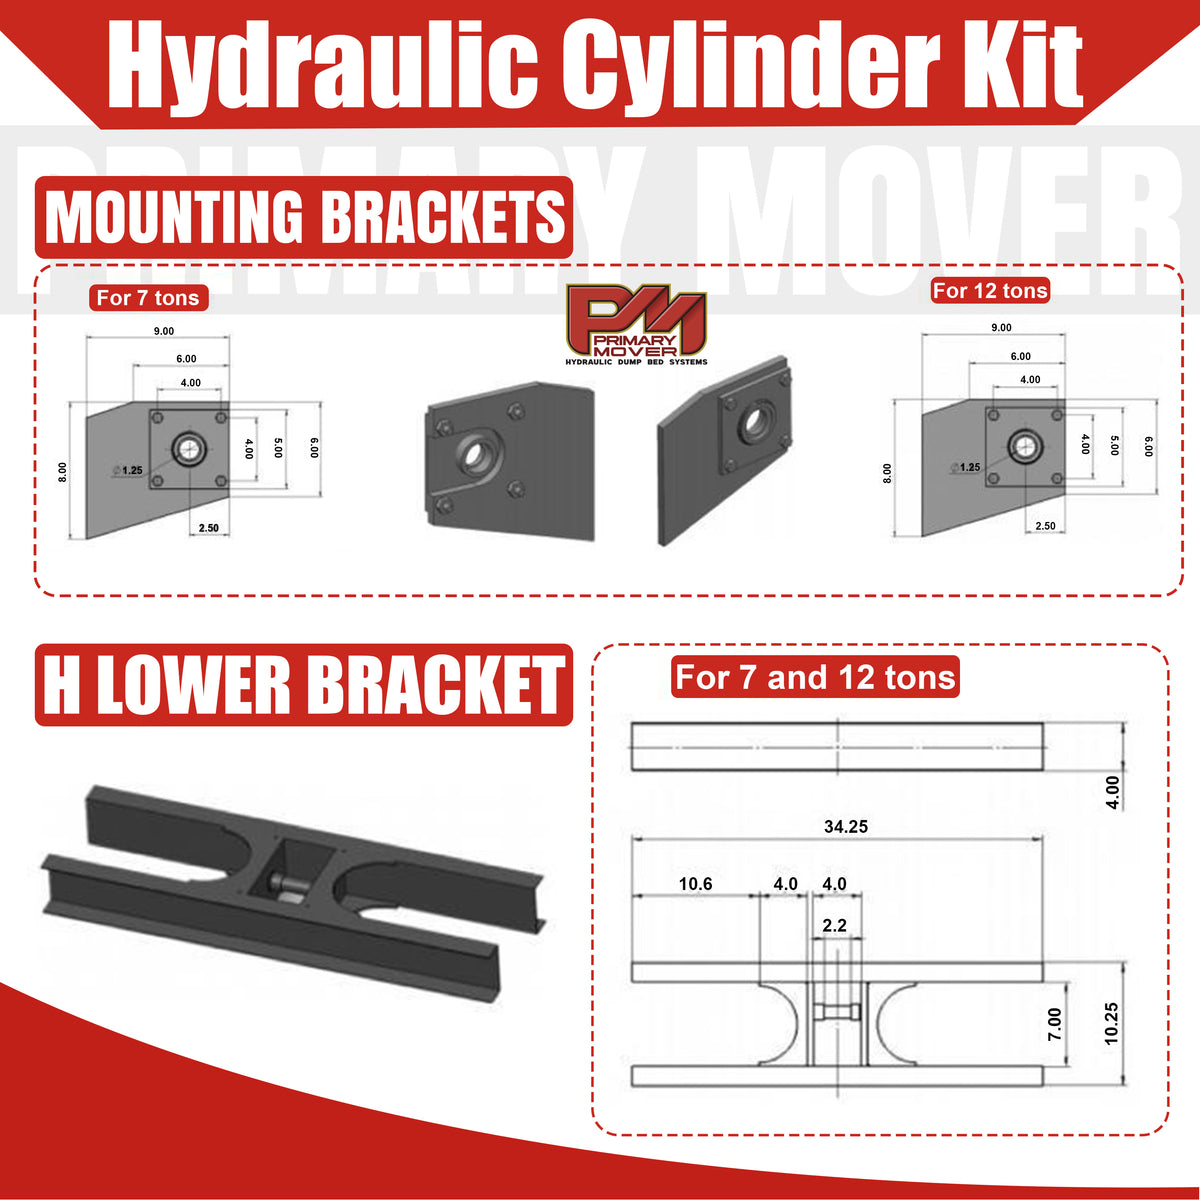 Telescopic Dump Trailer Cylinder Kit - 20 Ton Capacity - 135 Stroke, including mounting brackets, hydraulic power unit, hose assembly, and fittings, illustrated in a detailed diagram.